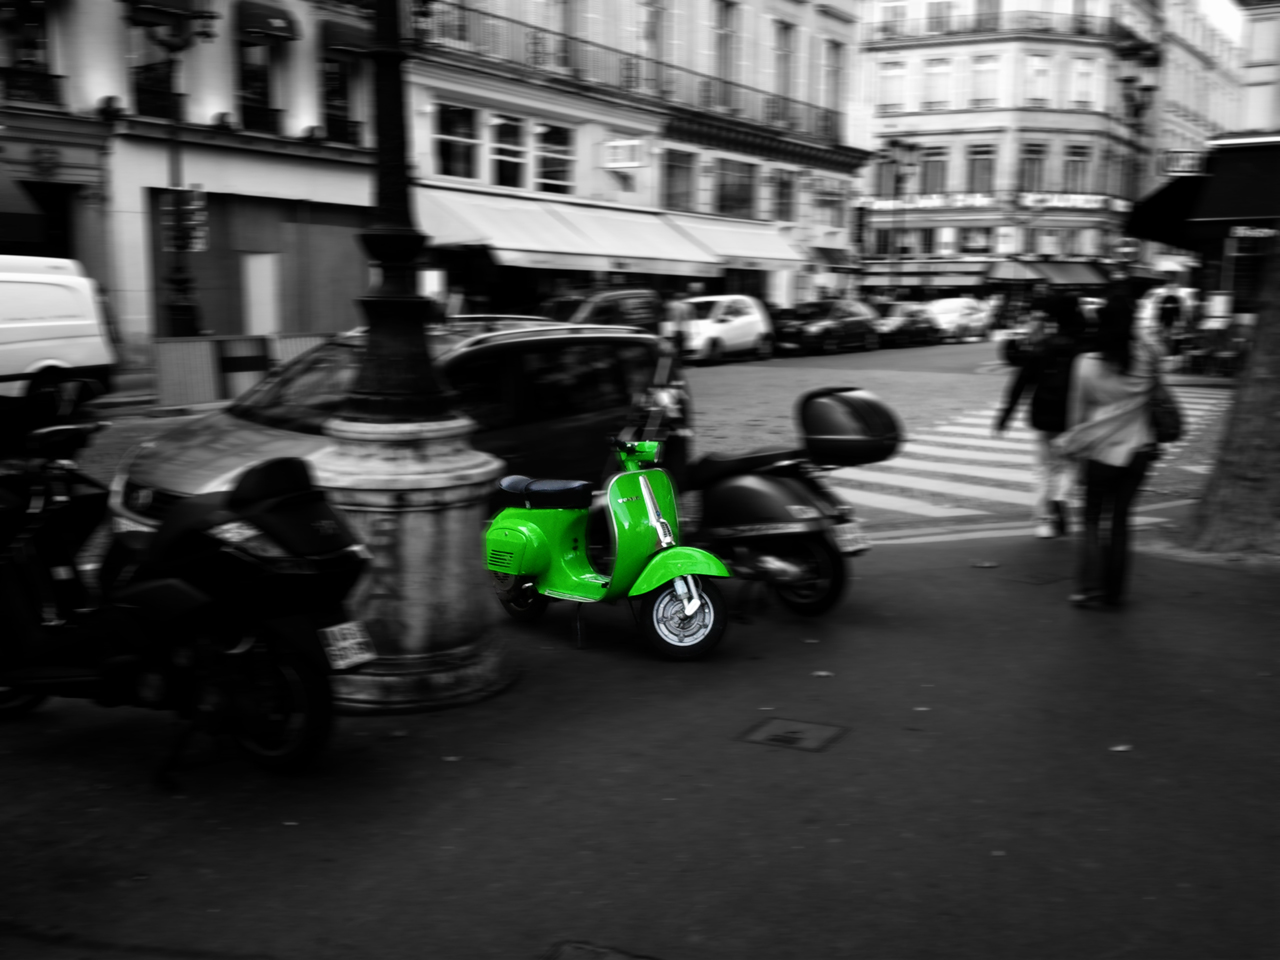 Wallpapers Motorbikes Scooters Be Green